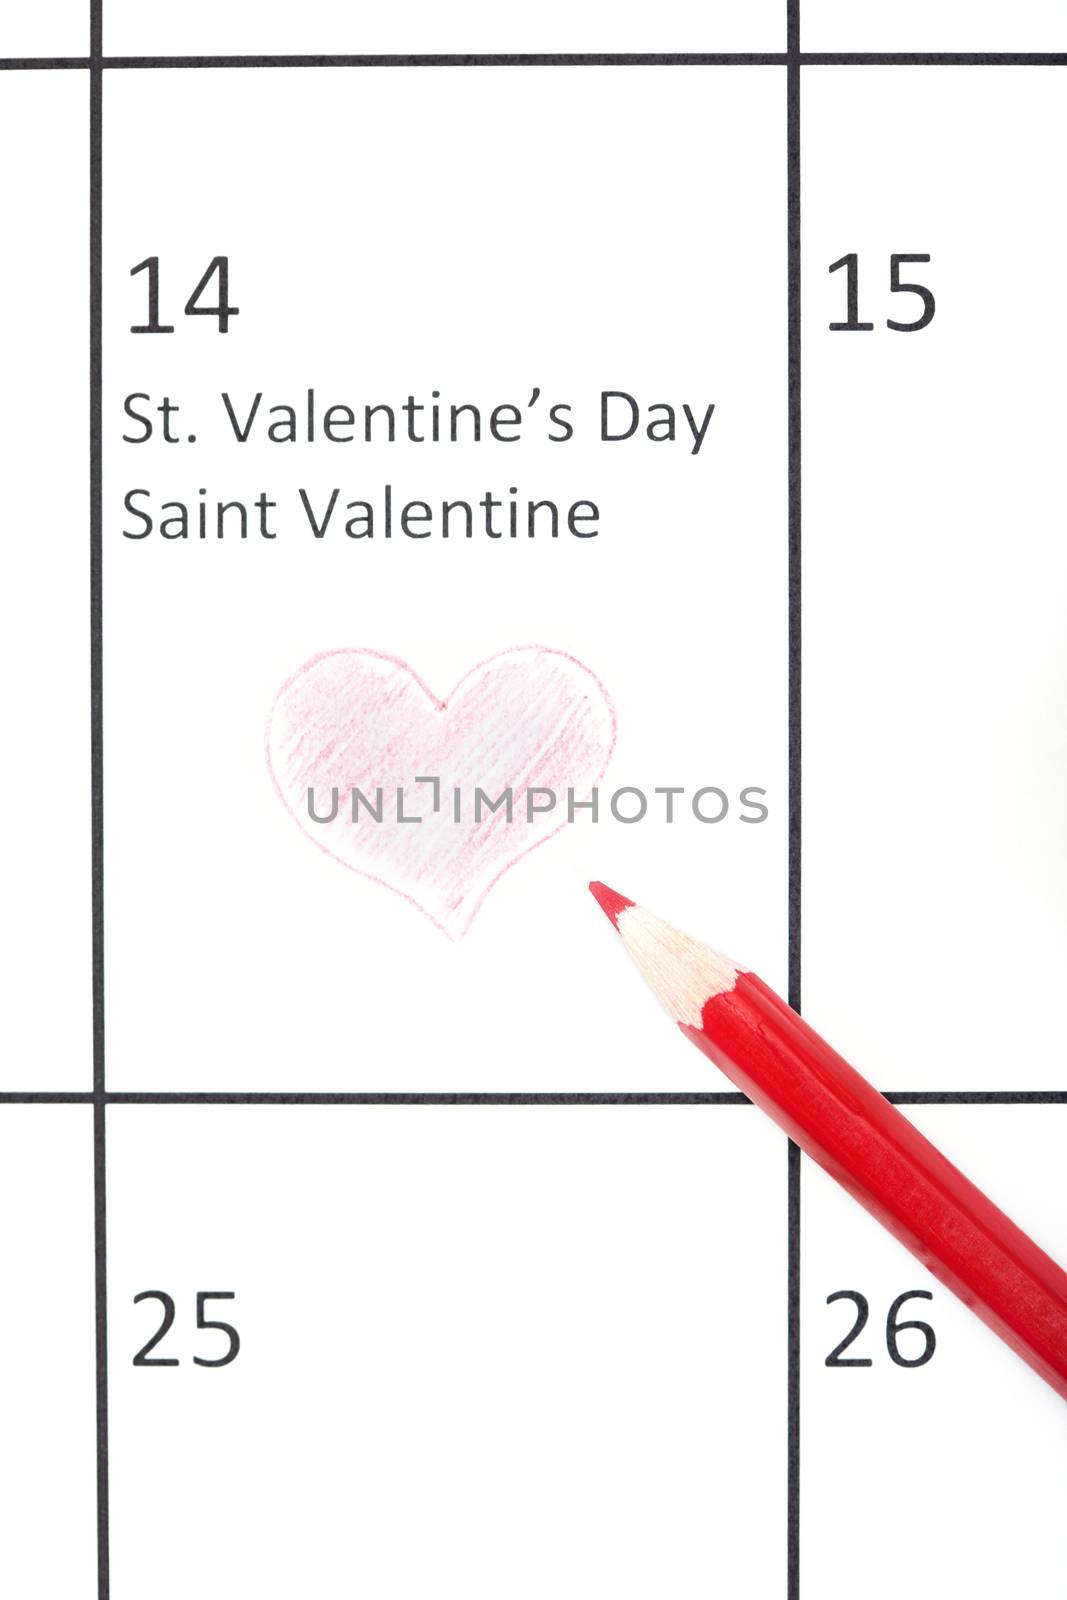 Red pencil on a calendar with Saint Valentine Day